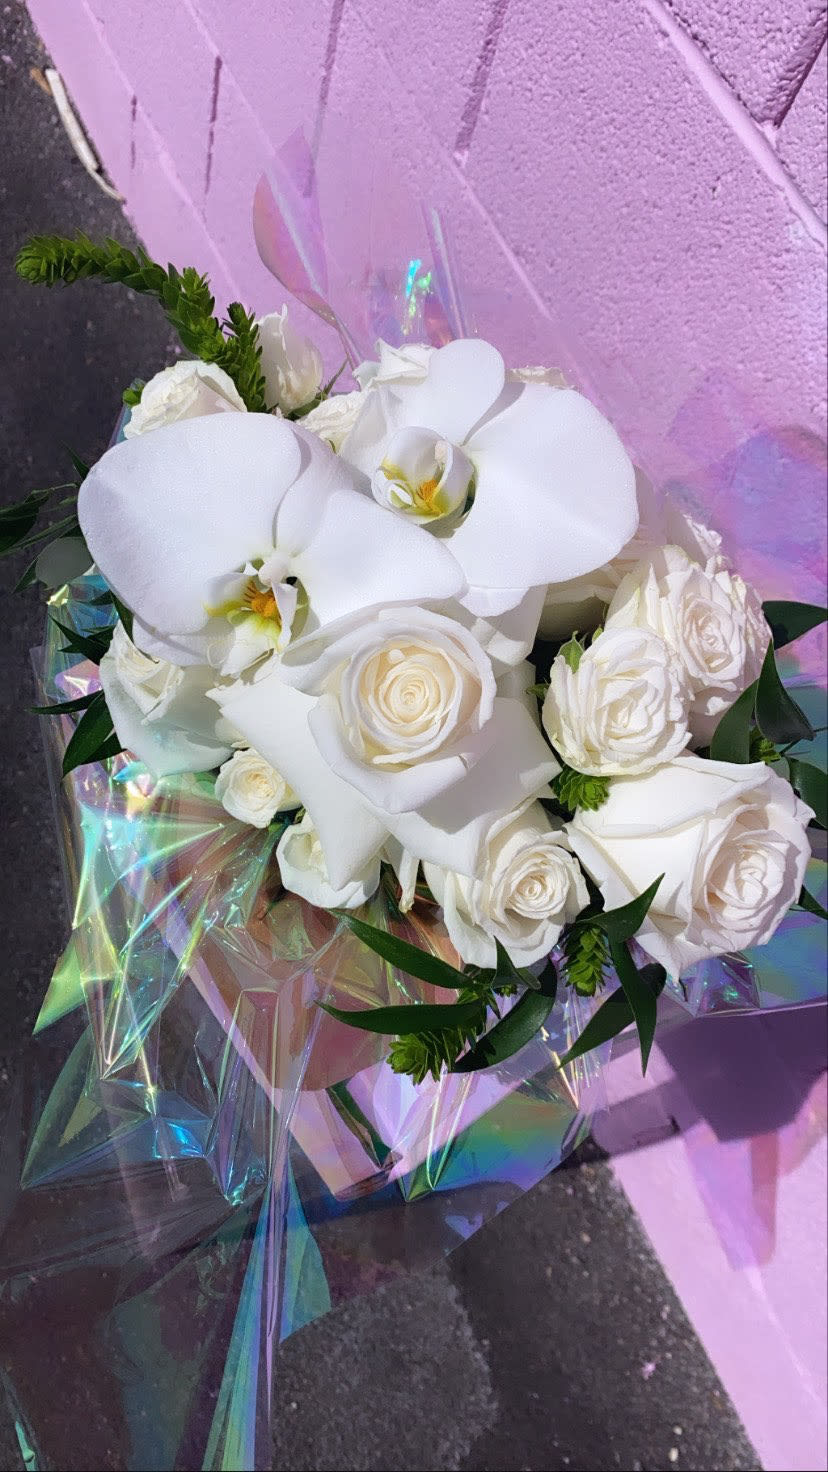 This white arrangement is filled with white roses and white Phalaenopsis orchid